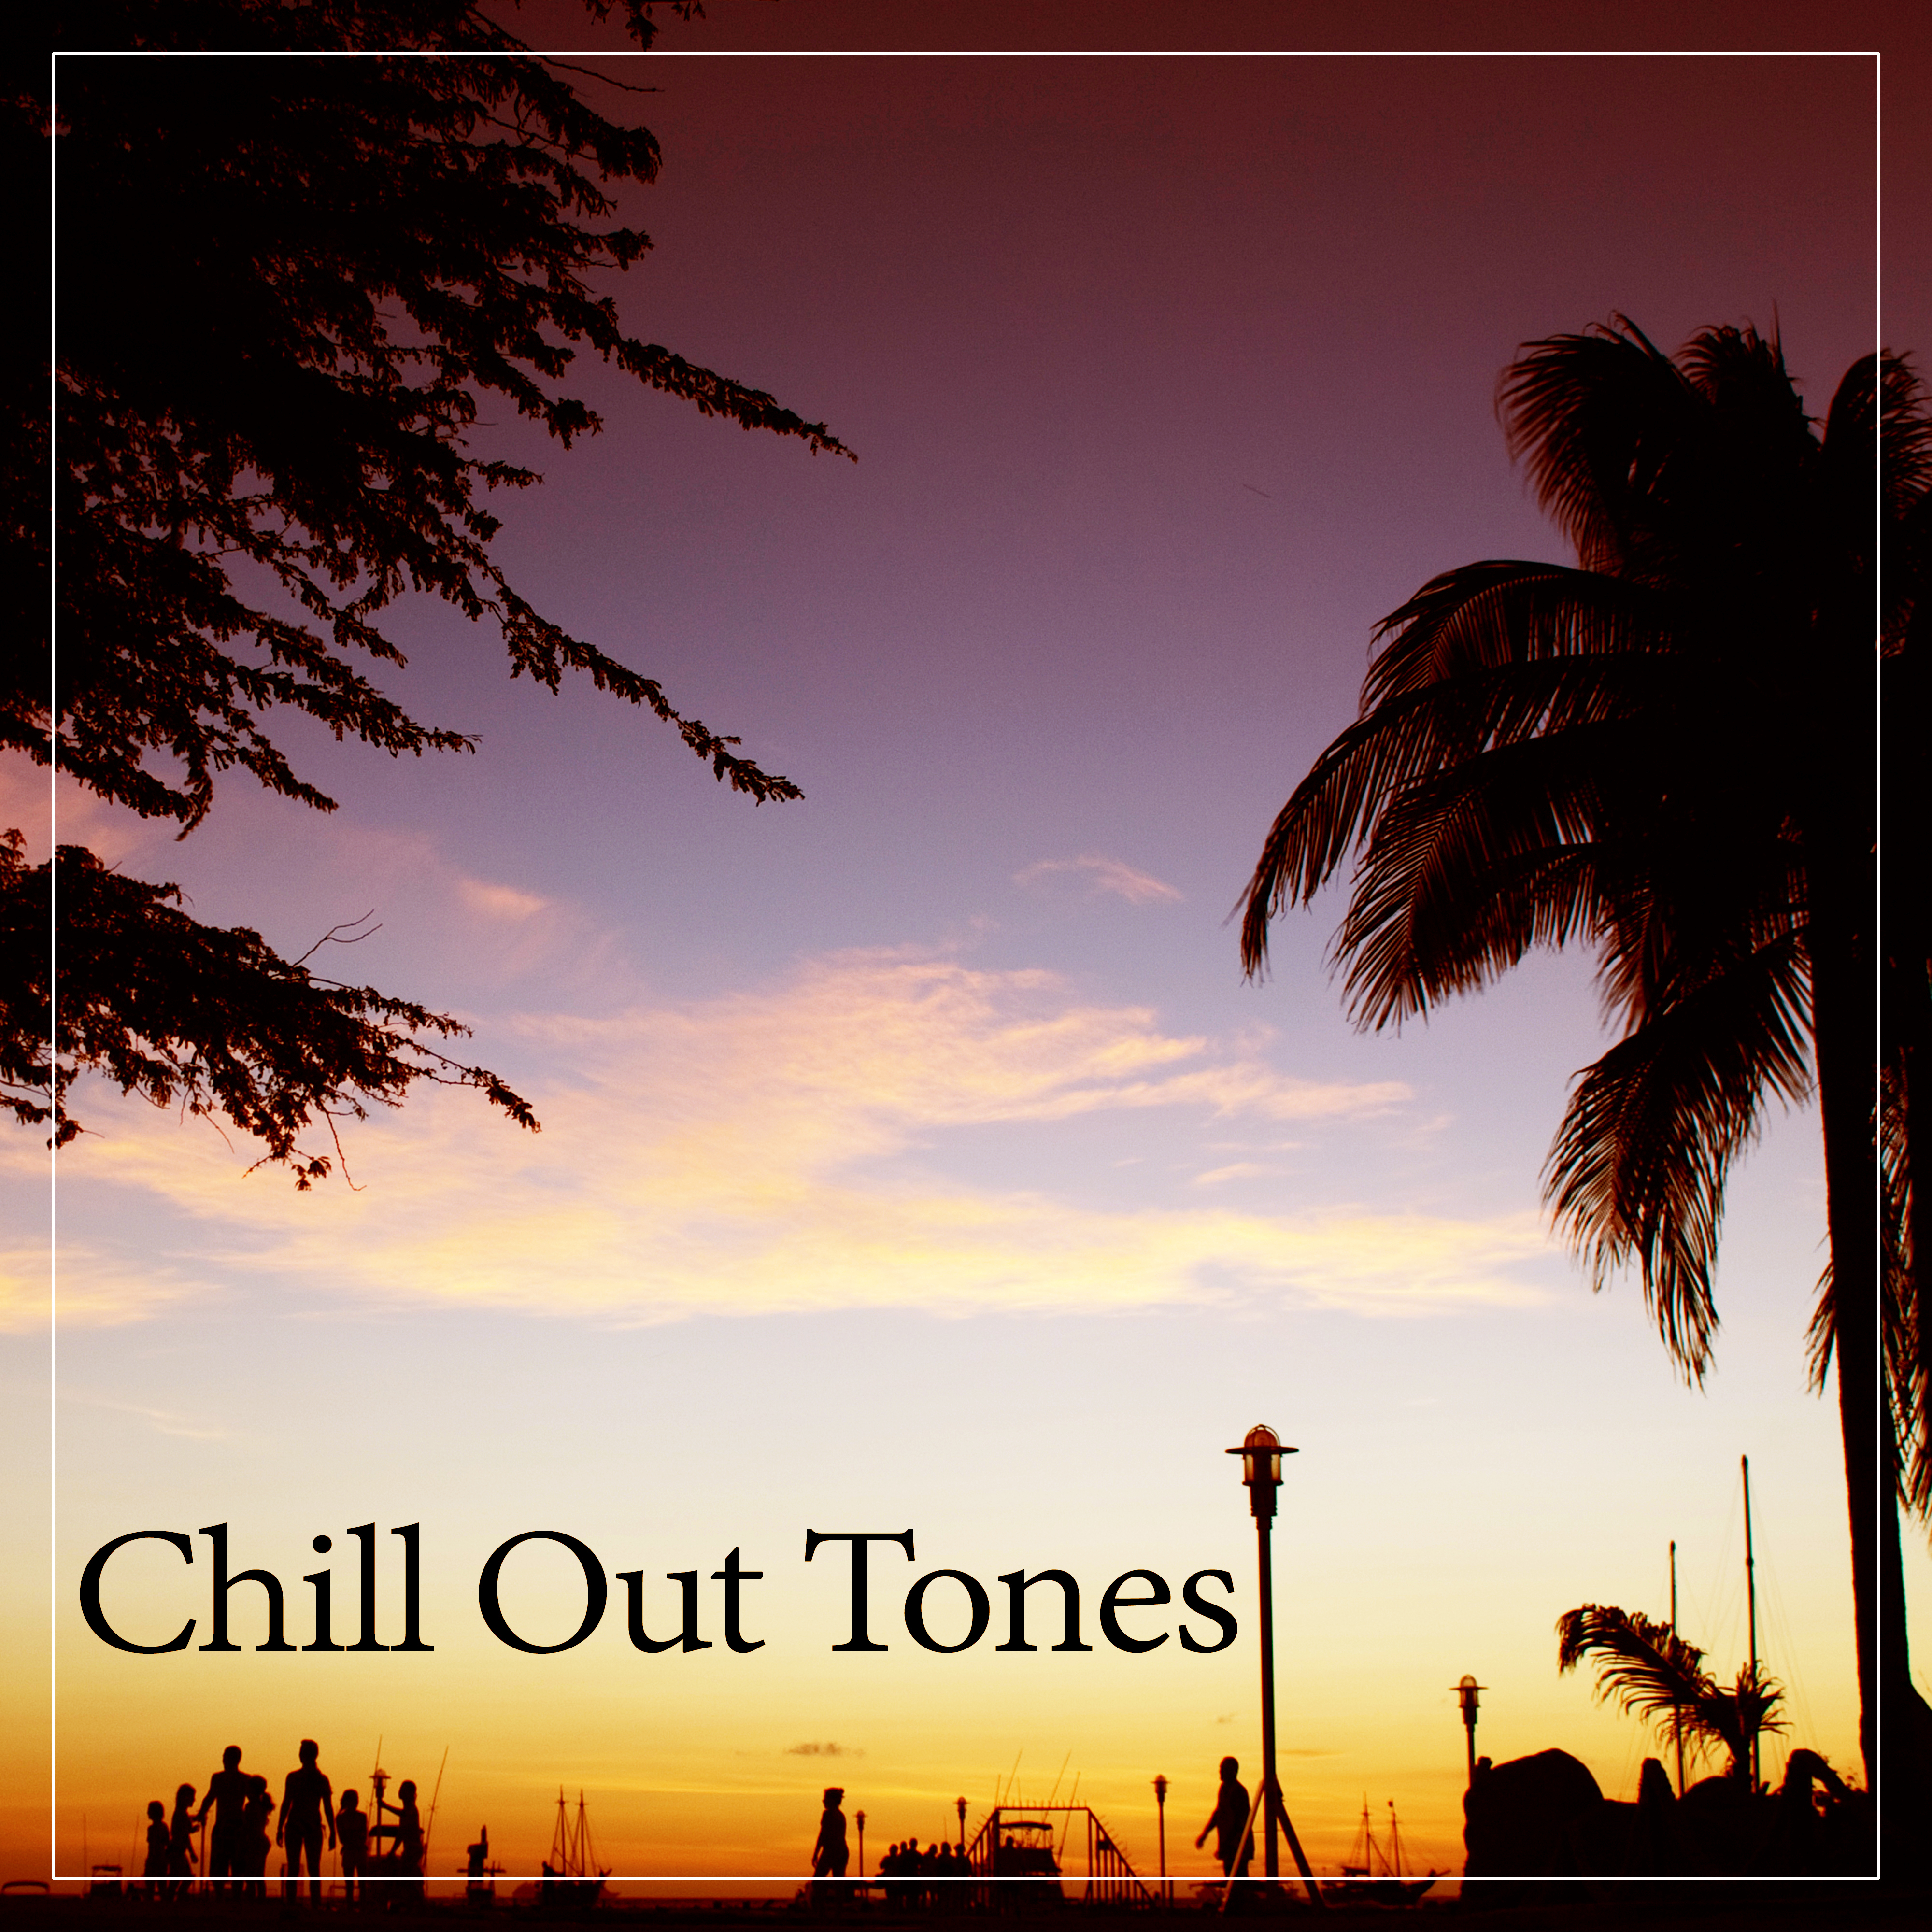 Chill Out Tones – Chill out Music, Summertime